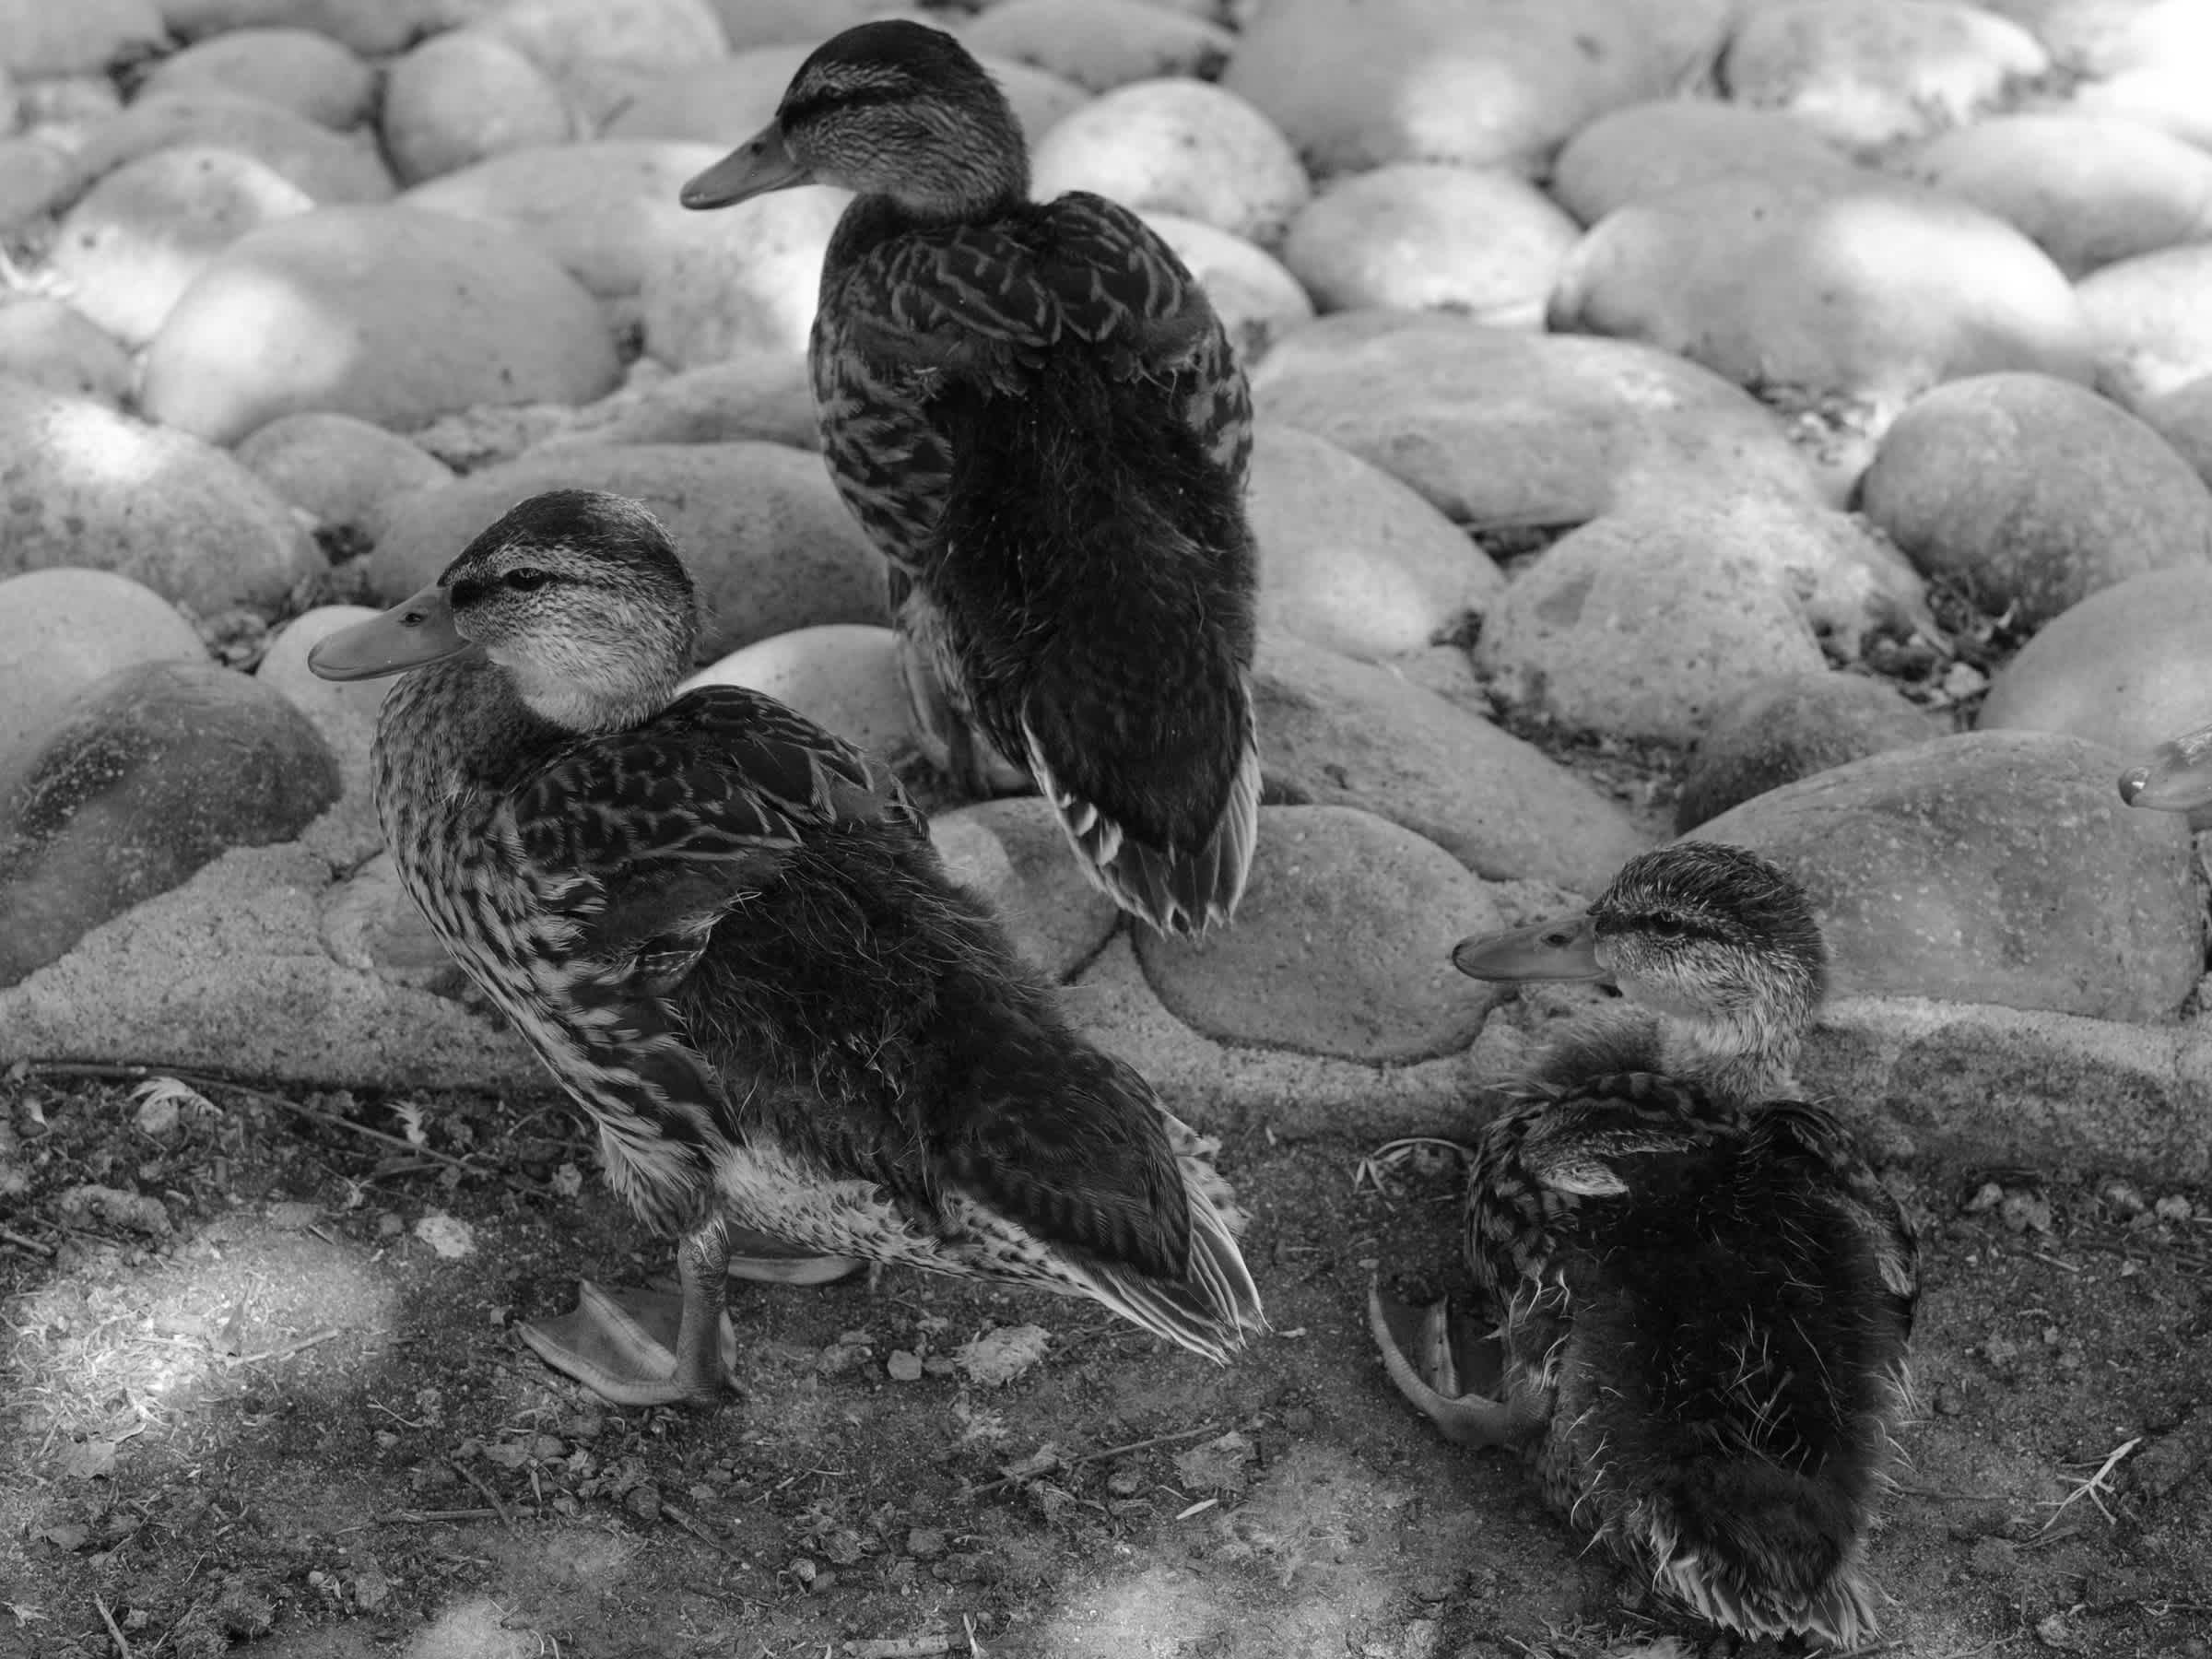 Ducks sitting by stones in black and white. 